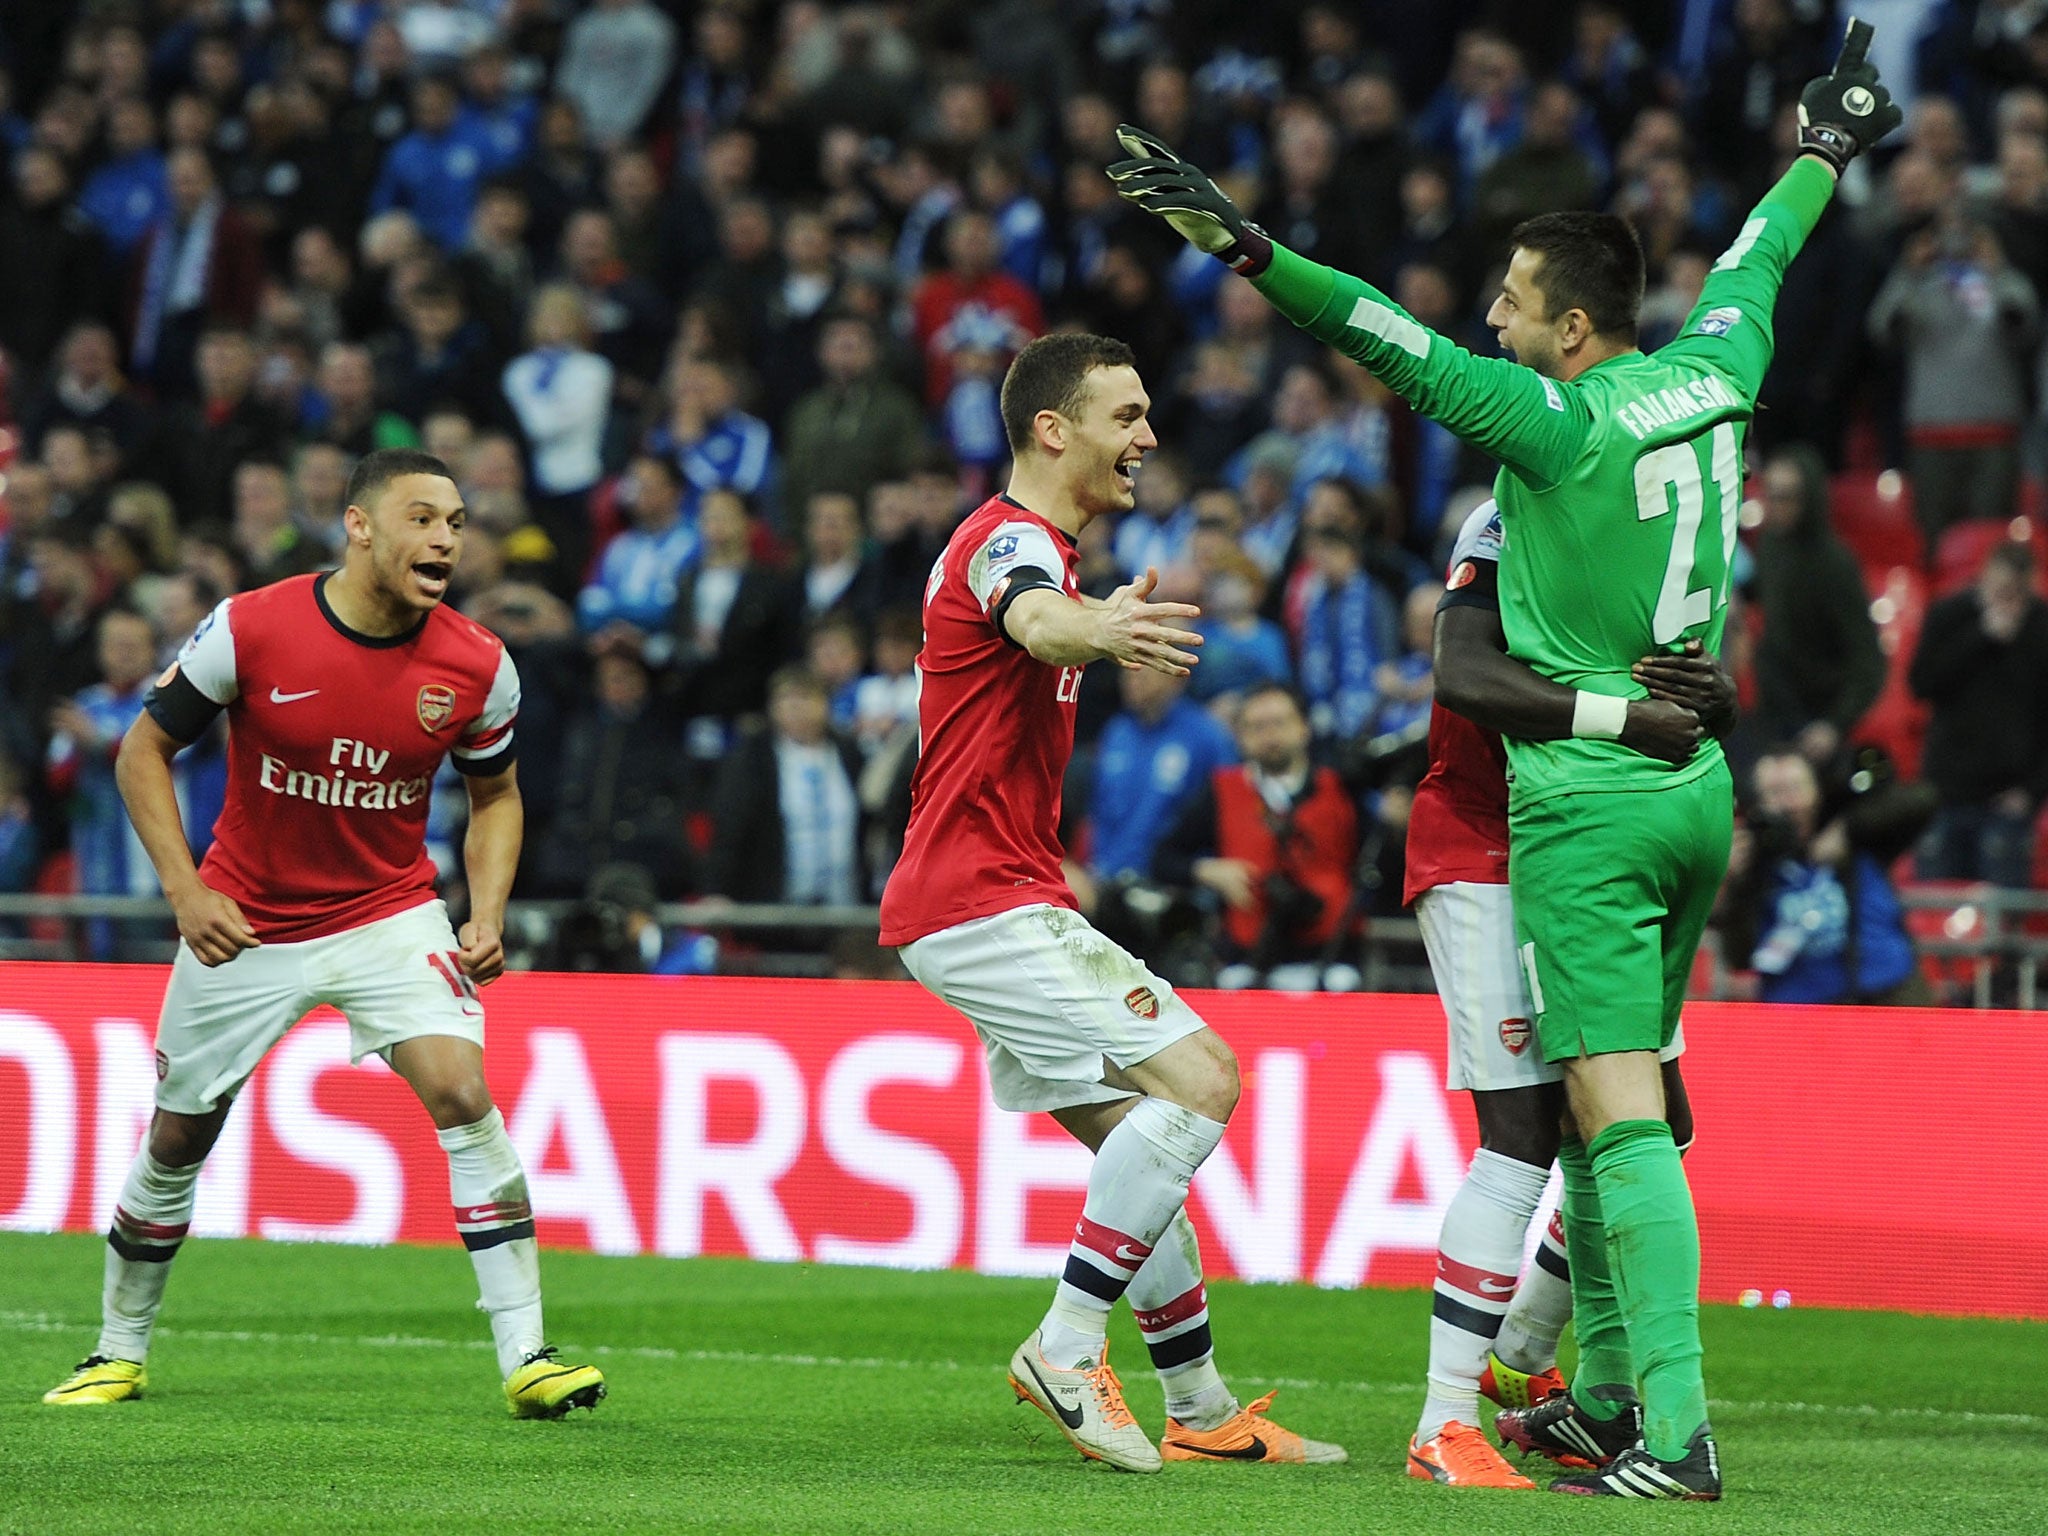 Thomas Vermaelen (third from right) celebrates with penalty-saving goalkeeper Lukasz Fabianski after Arsenal defeat Wigan in the FA Cup semi-final